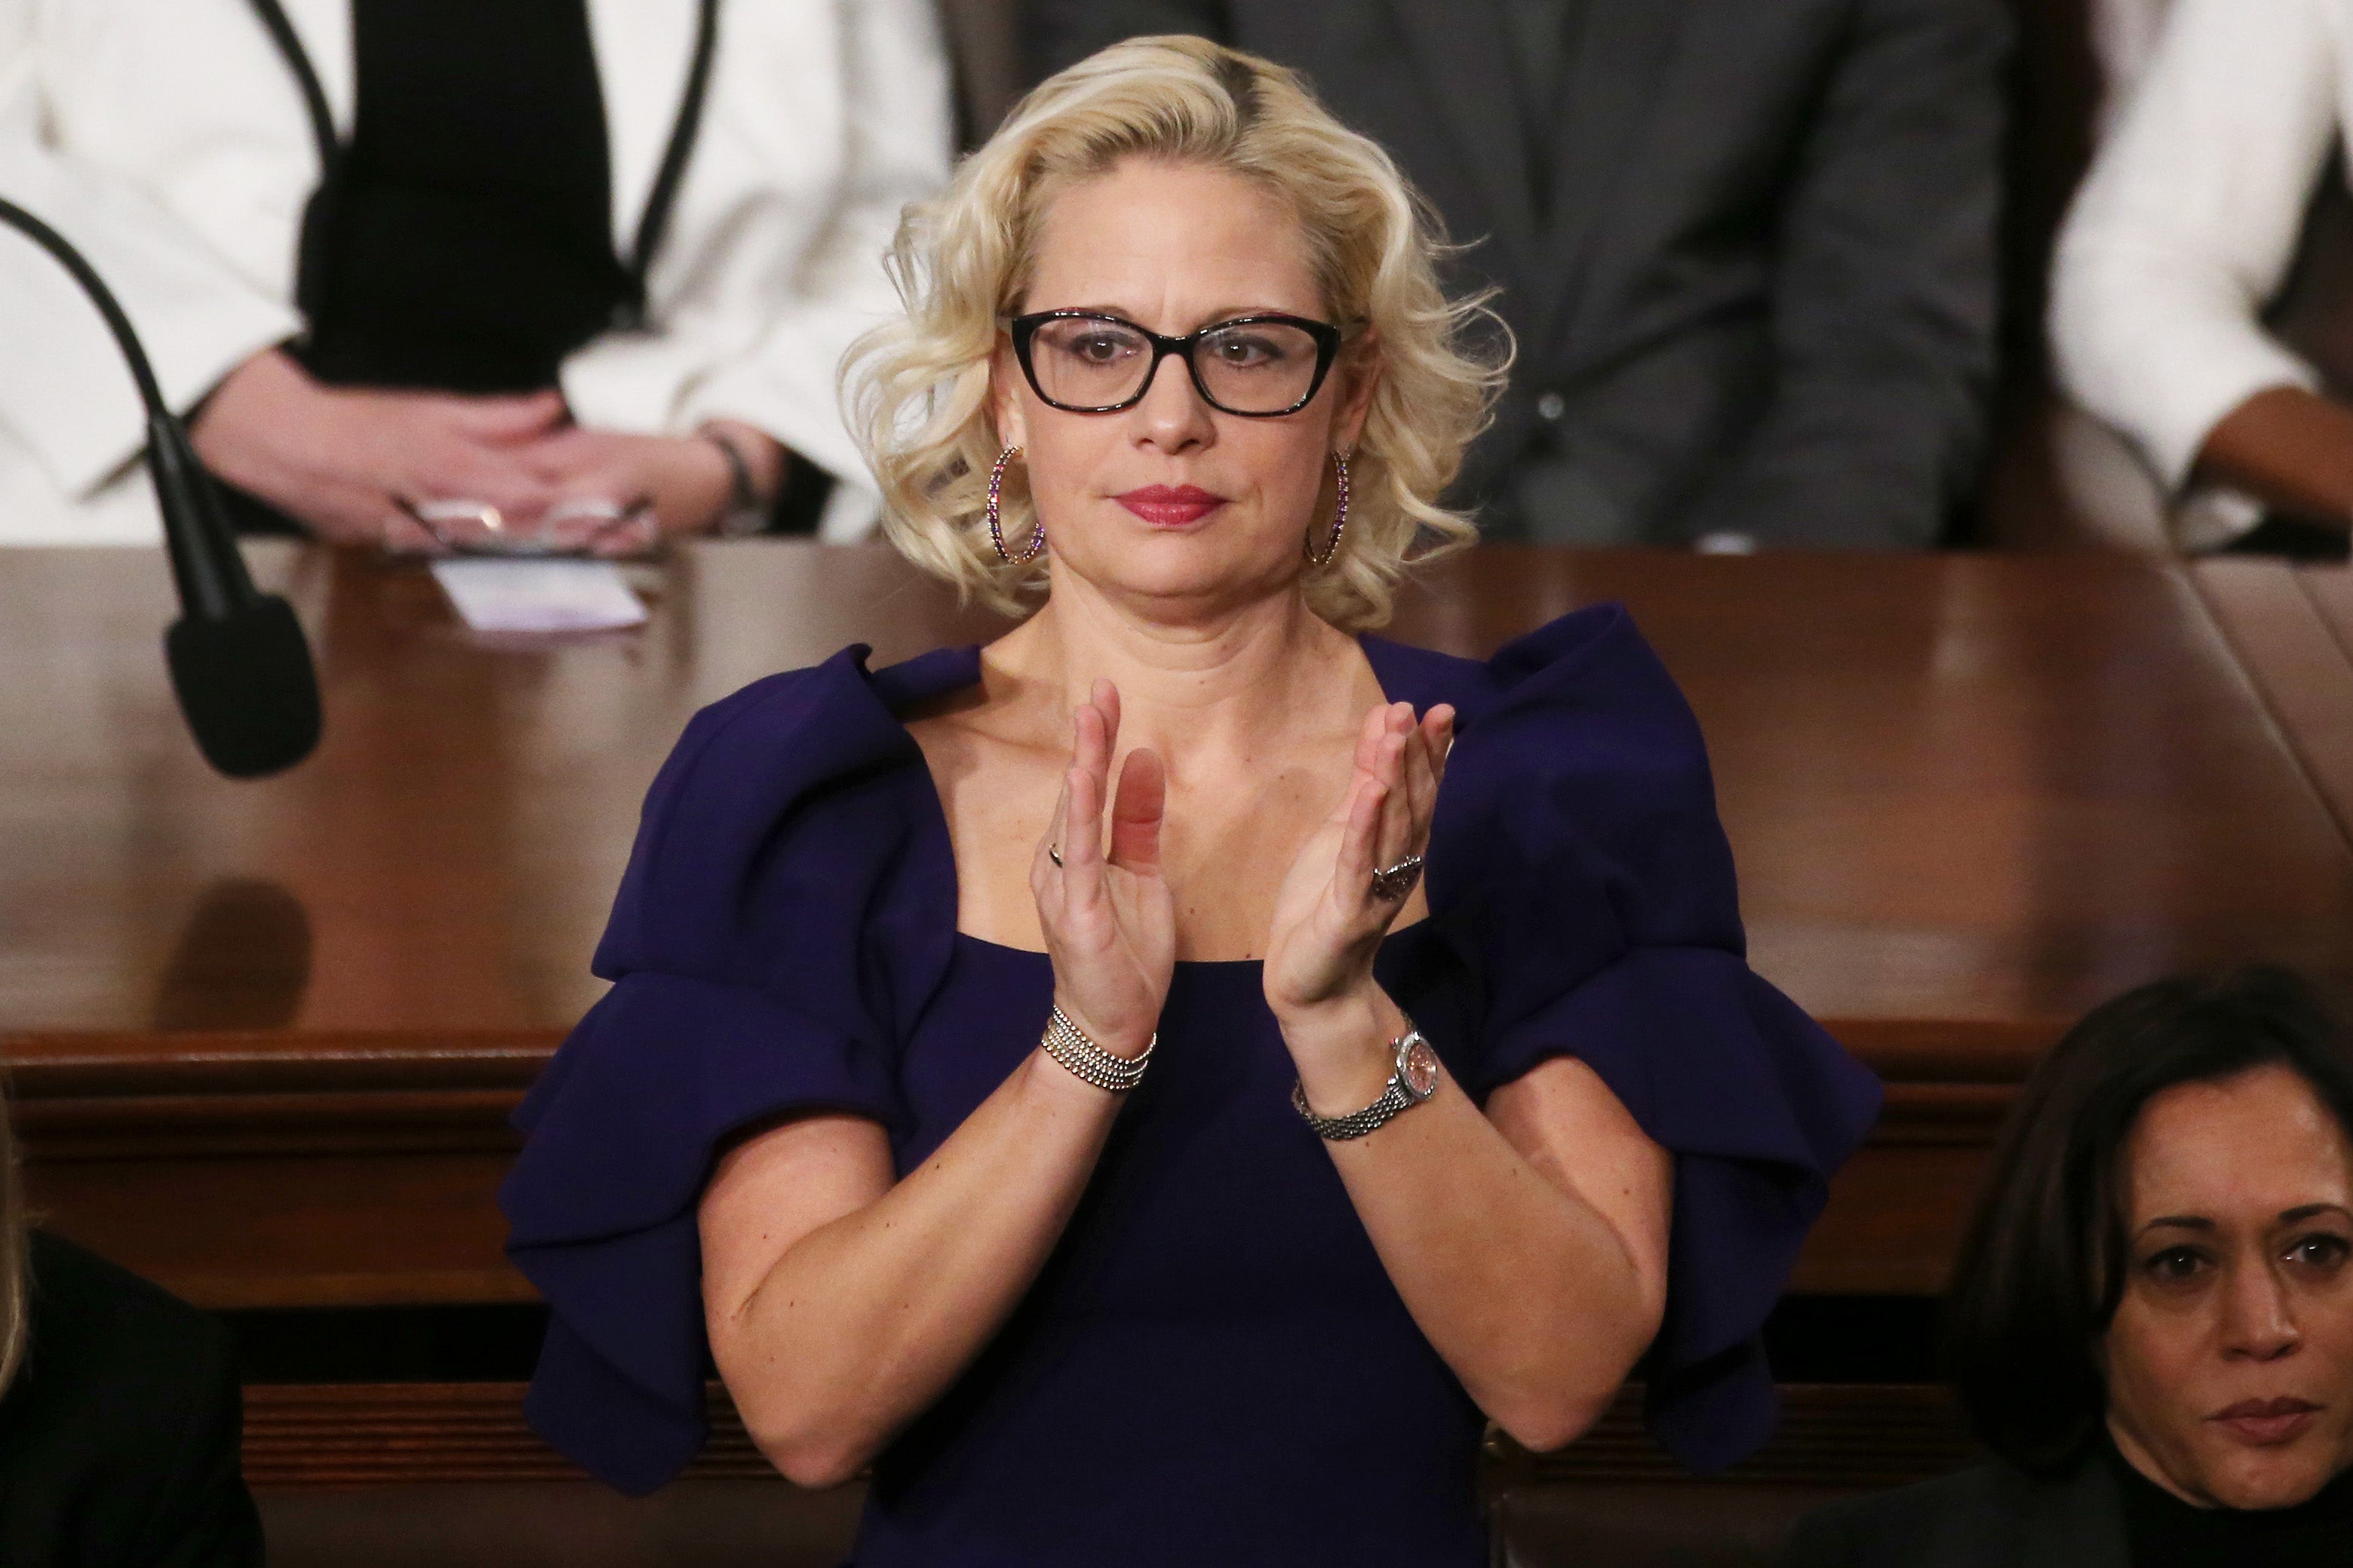 Company behind Krysten Sinema’s F*** Off ring announces proceeds will go to organisation fighting for increased minimum wage